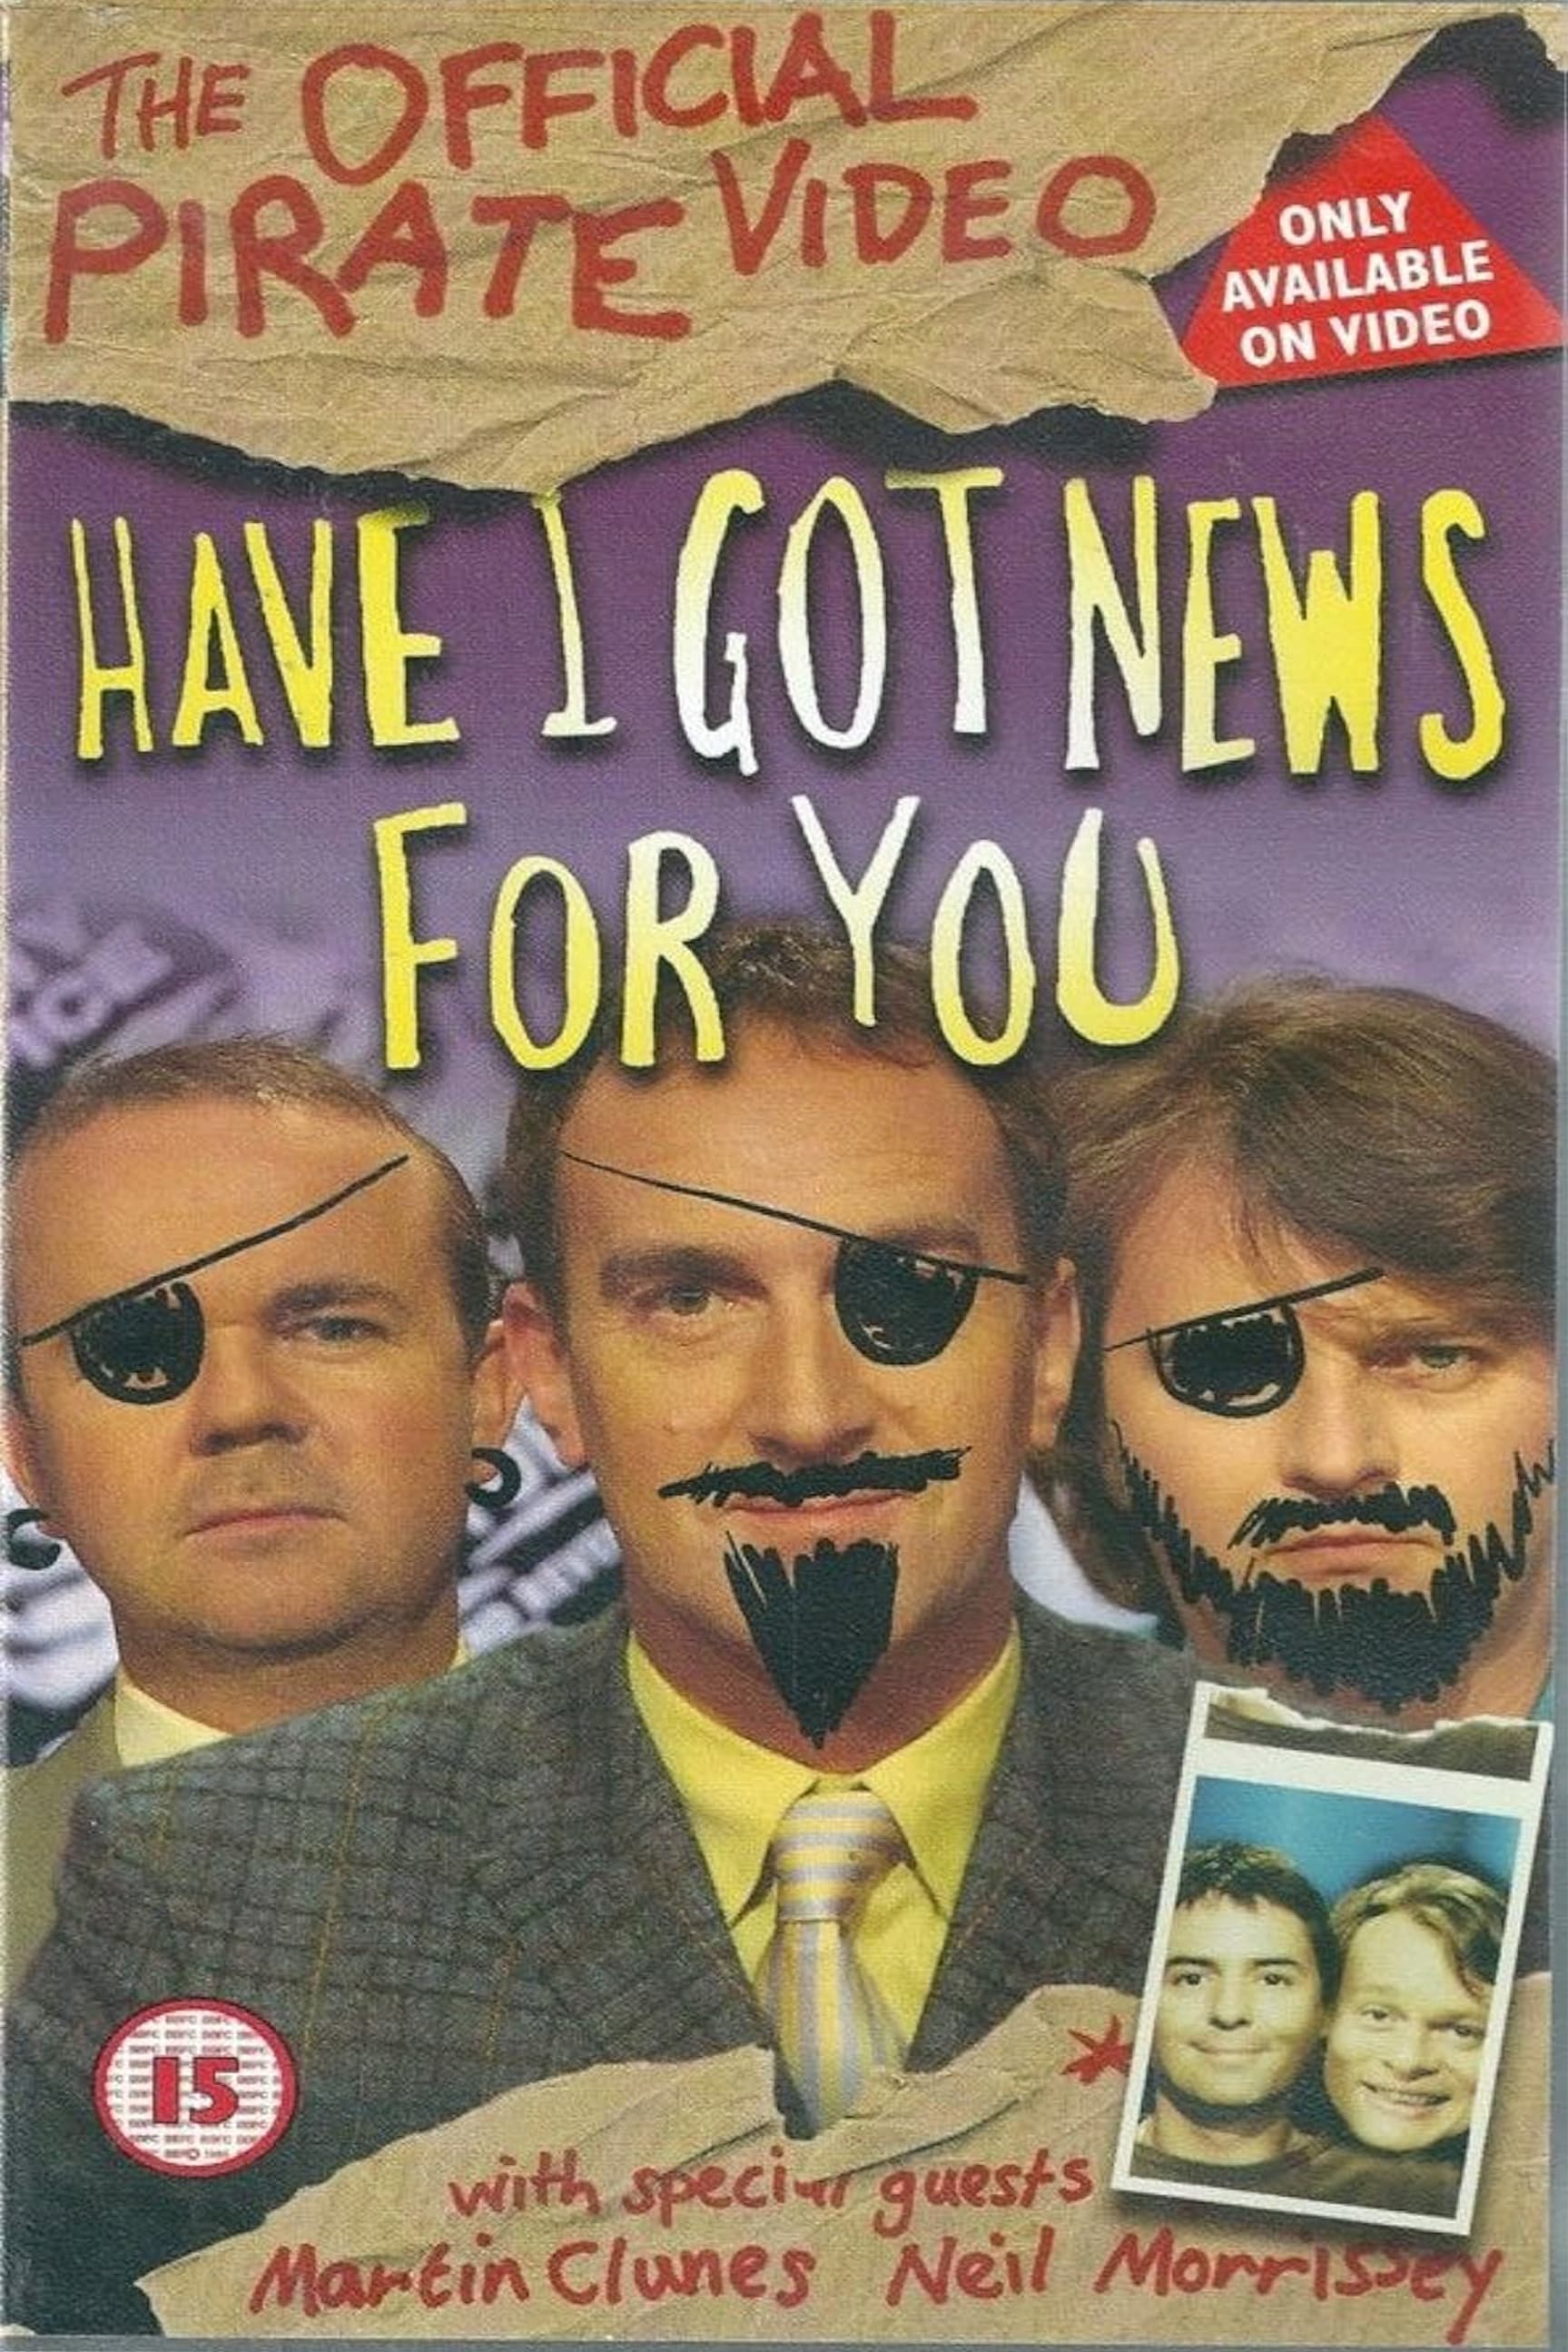 Have I Got News for You: The Official Pirate Video